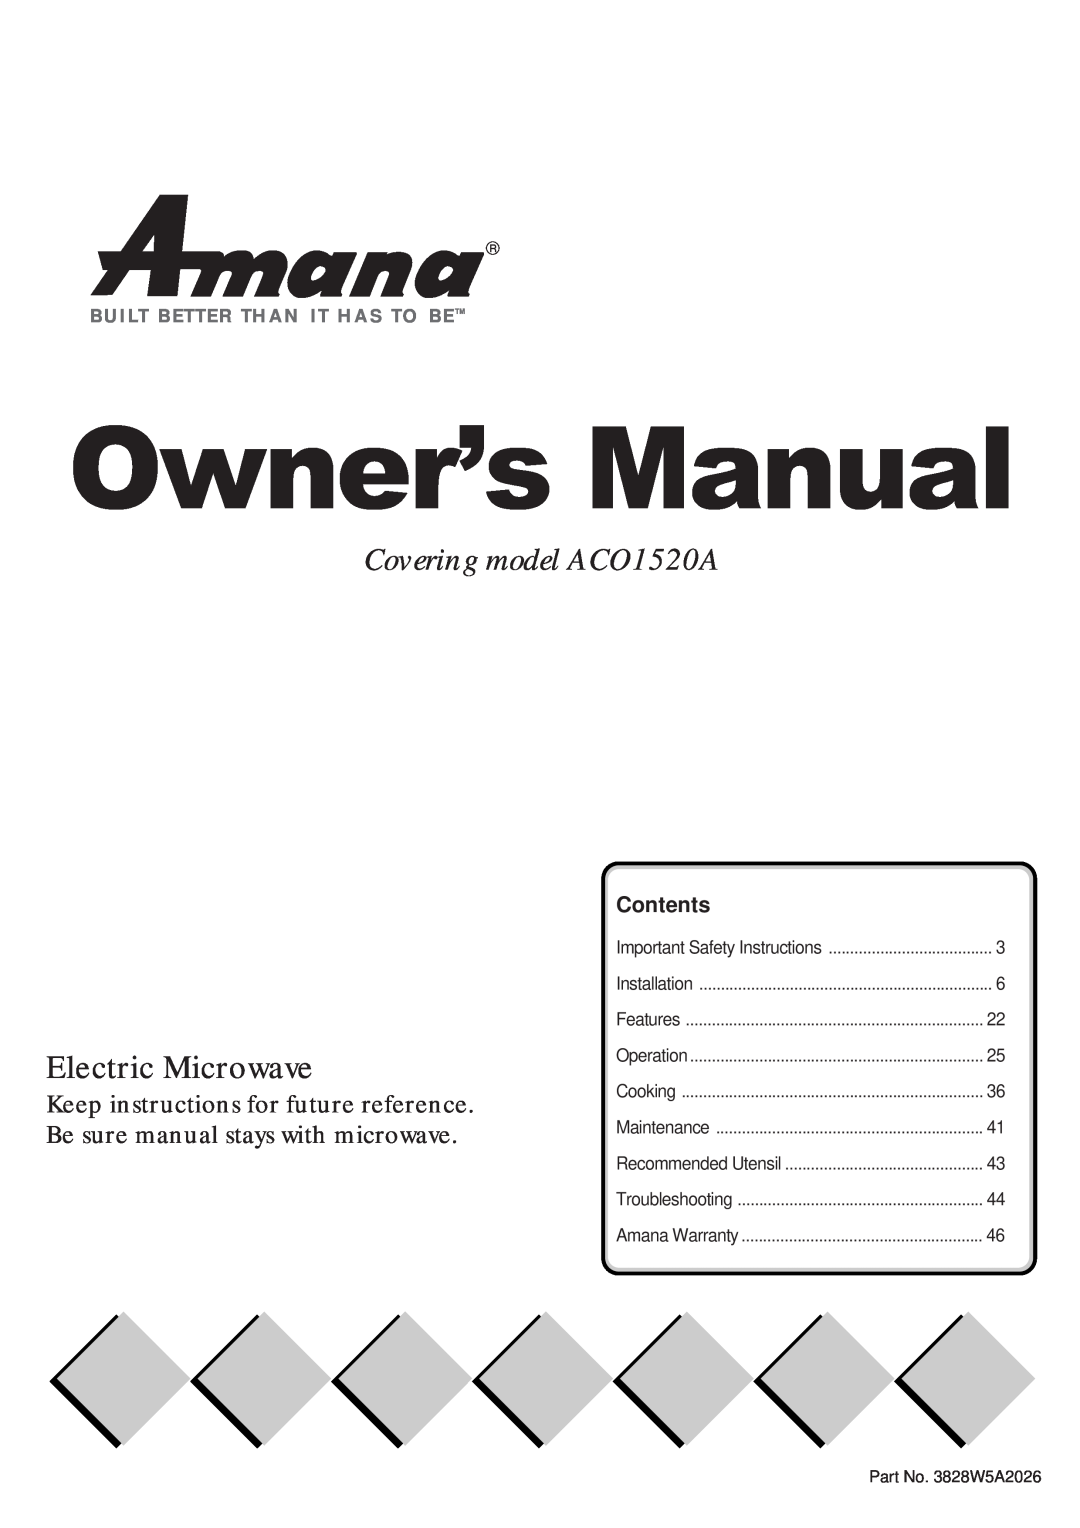 Amana important safety instructions Covering model ACO1520A, Electric Microwave, Contents, OwnerÕs Manual, Installation 